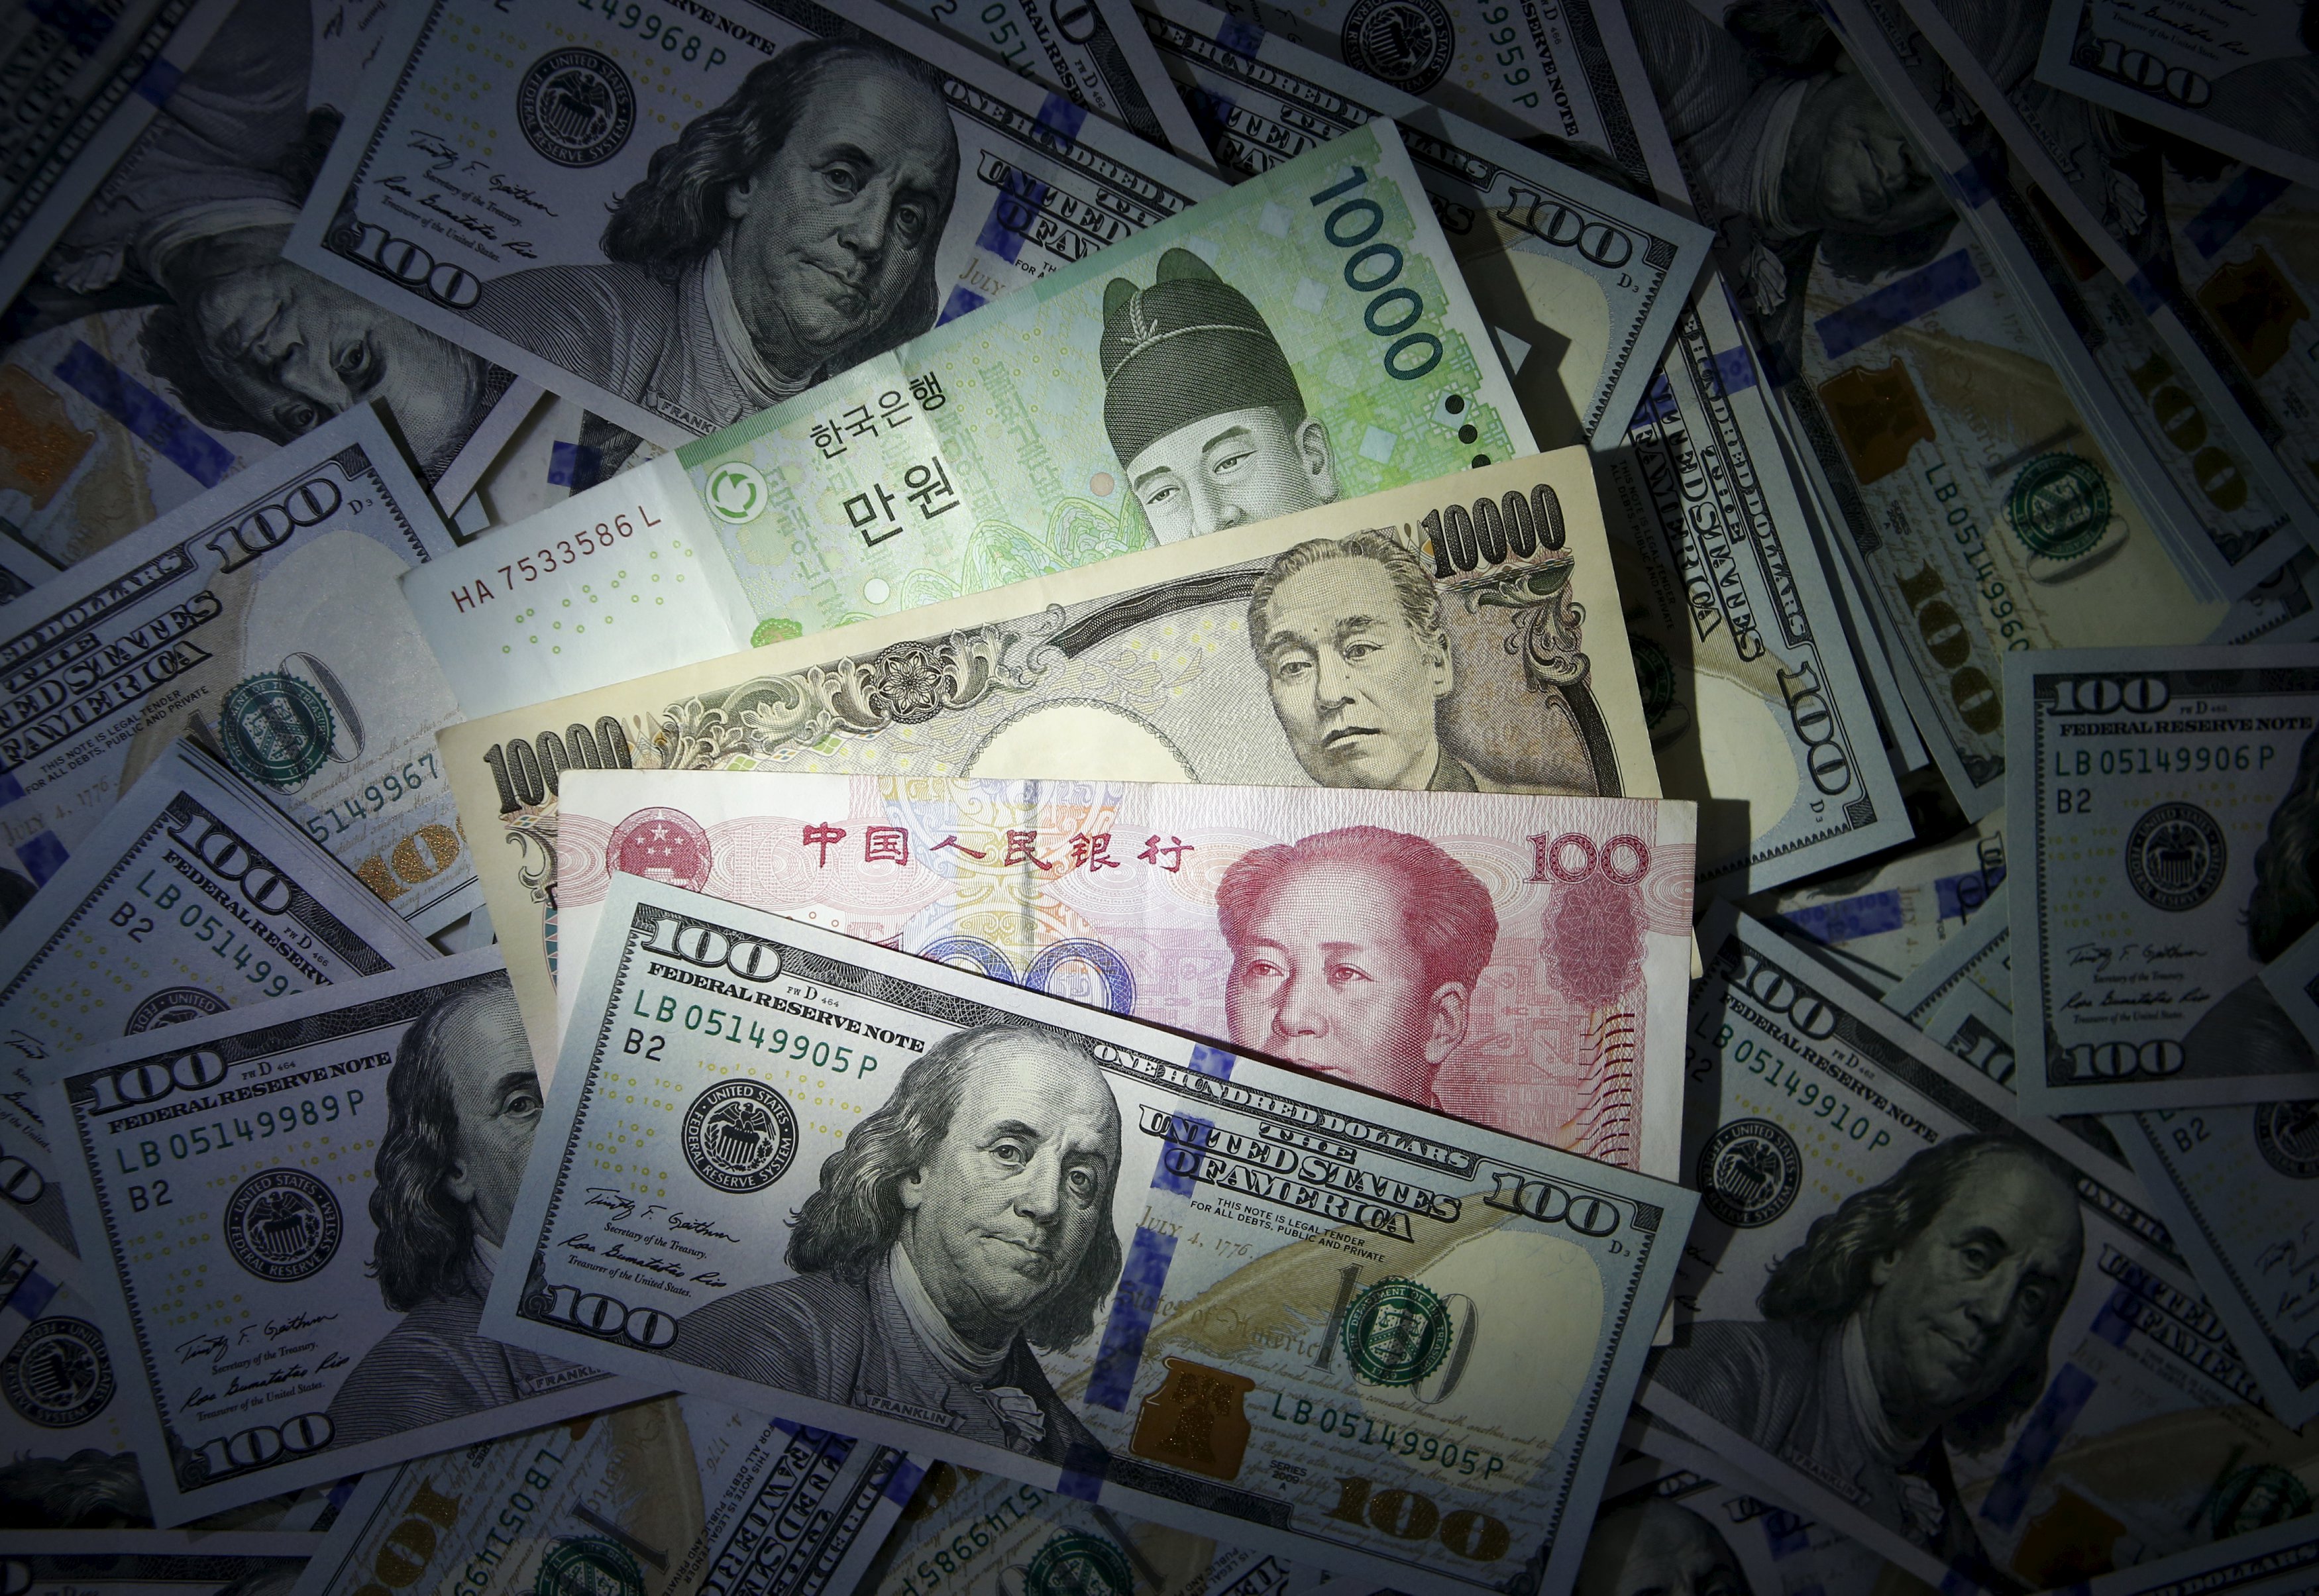 South Korean won, Chinese yuan and Japanese yen notes are seen on U.S. 100 dollar notes in this picture illustration taken in Seoul, South Korea, December 15, 2015. As investors brace for this week's historic U.S. interest rate decision, central banks in Asia's emerging markets will be standing by a quarter of a trillion dollars in emergency liquidity lines with China and Japan to prevent routs in their currencies. REUTERS/Kim Hong-Ji